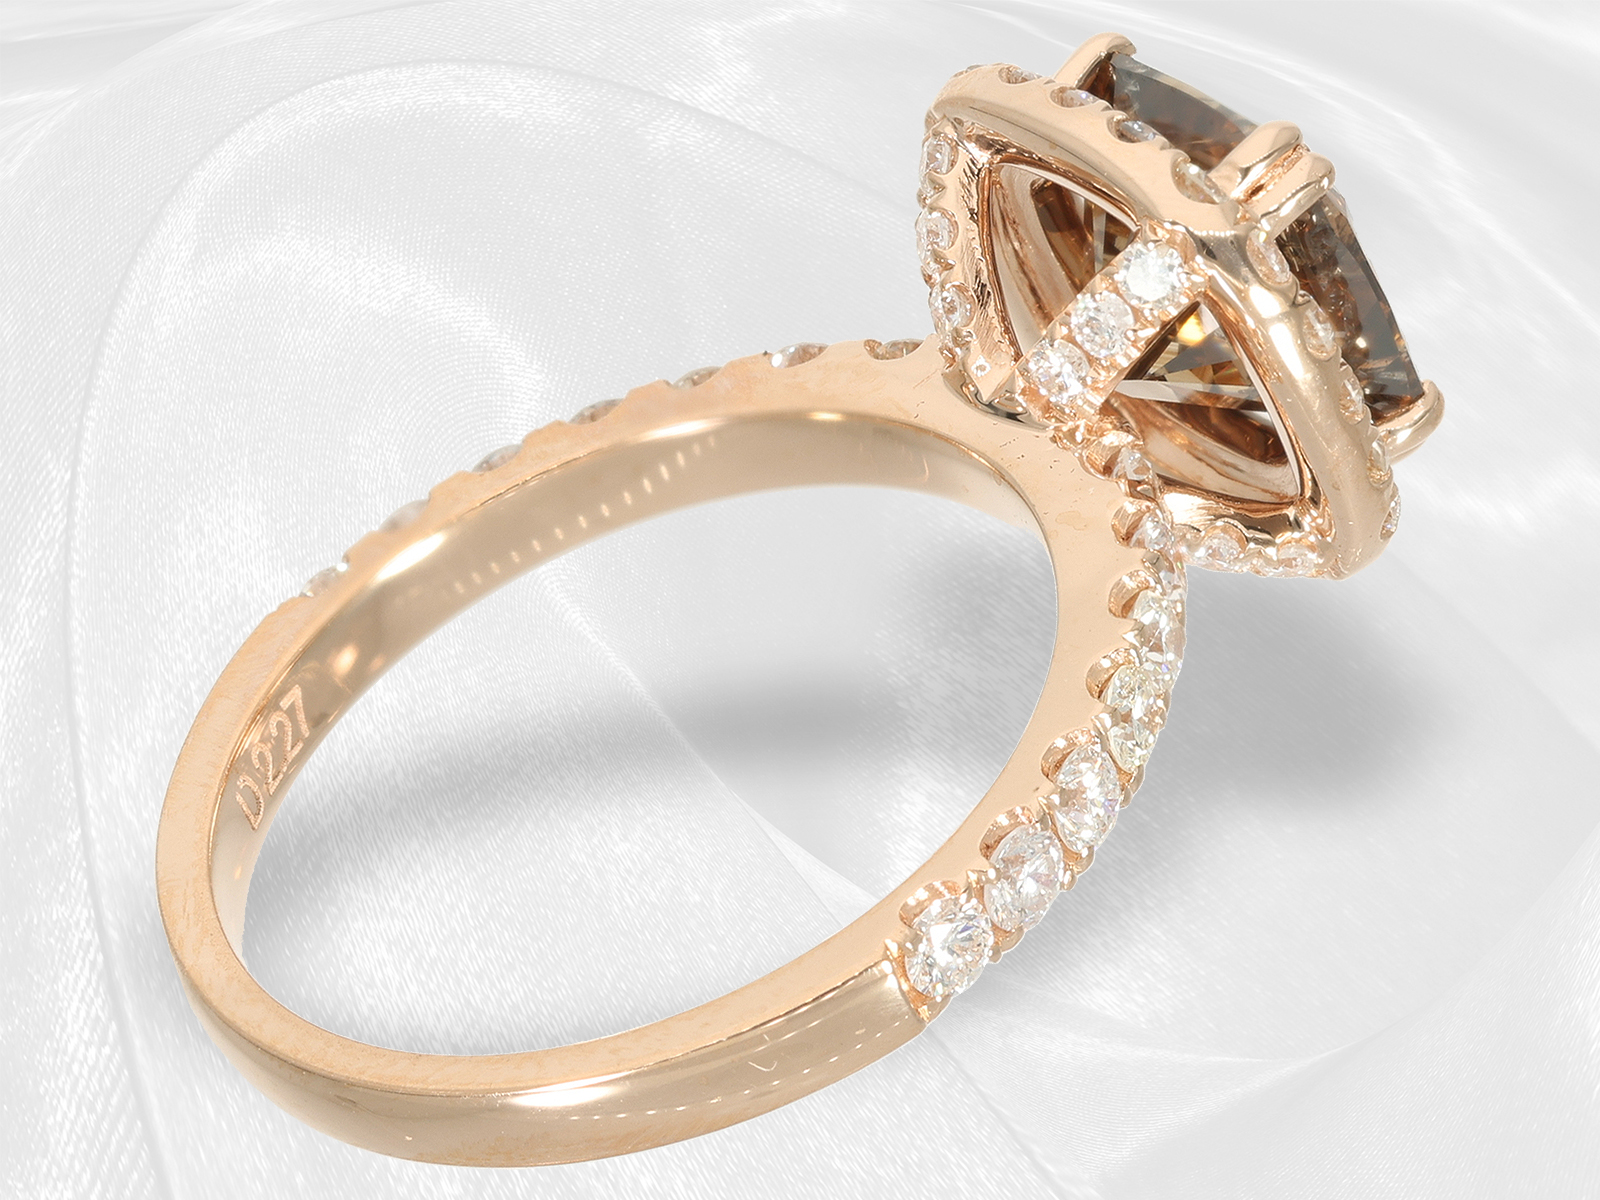 Interesting high carat pink gold ring with white and a fancy brilliant-cut diamond of 2.28ct, unworn - Image 6 of 7